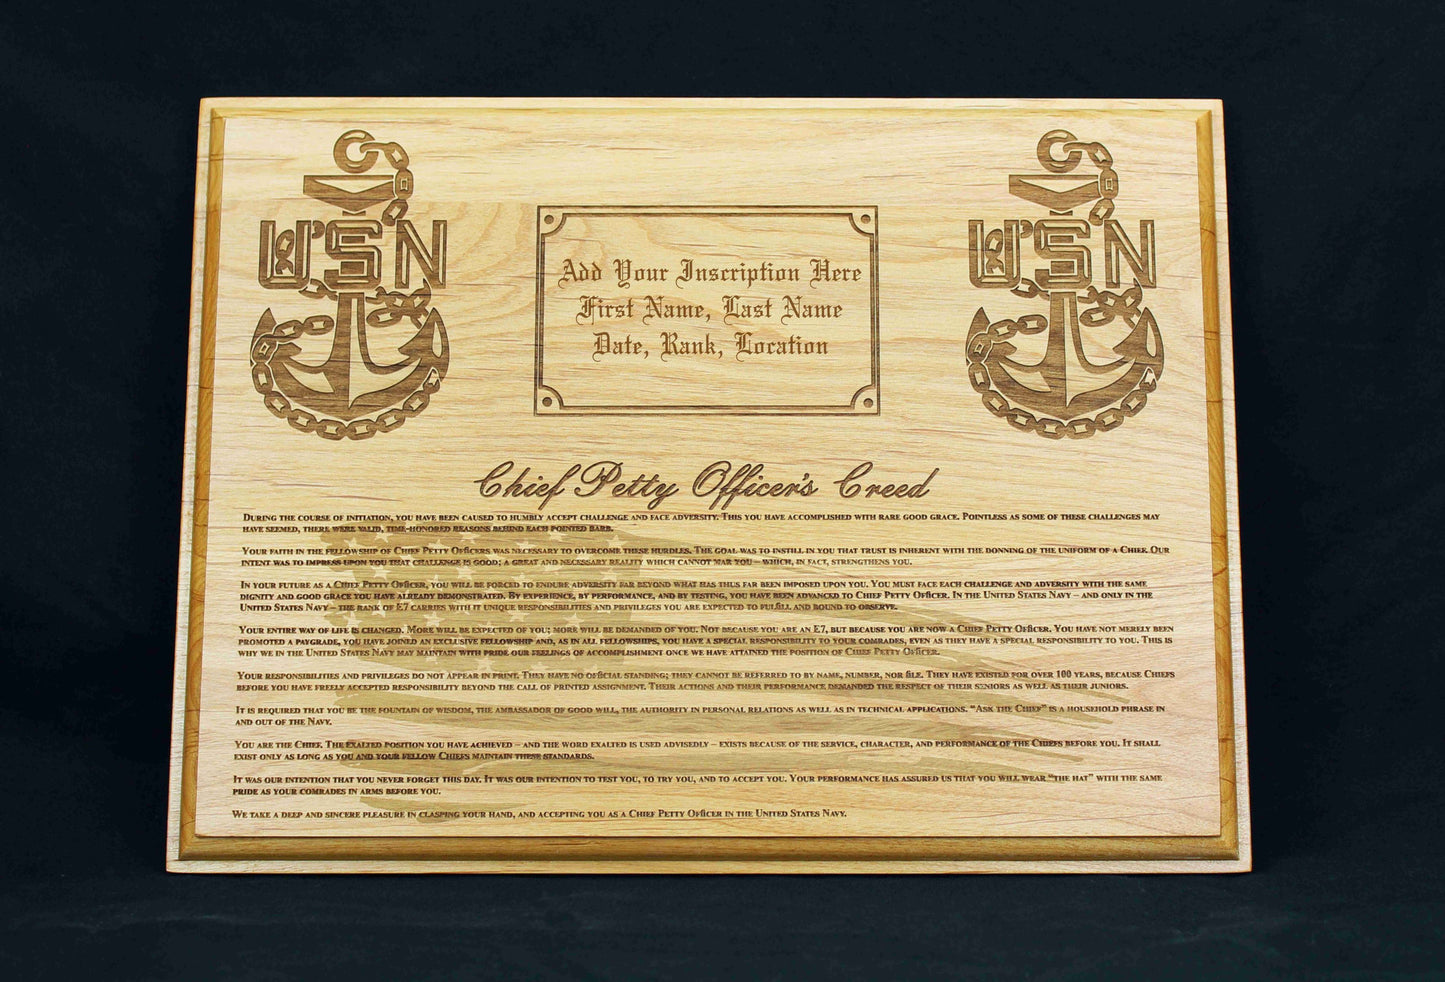 Personalized Navy Chief's Creed Plaque